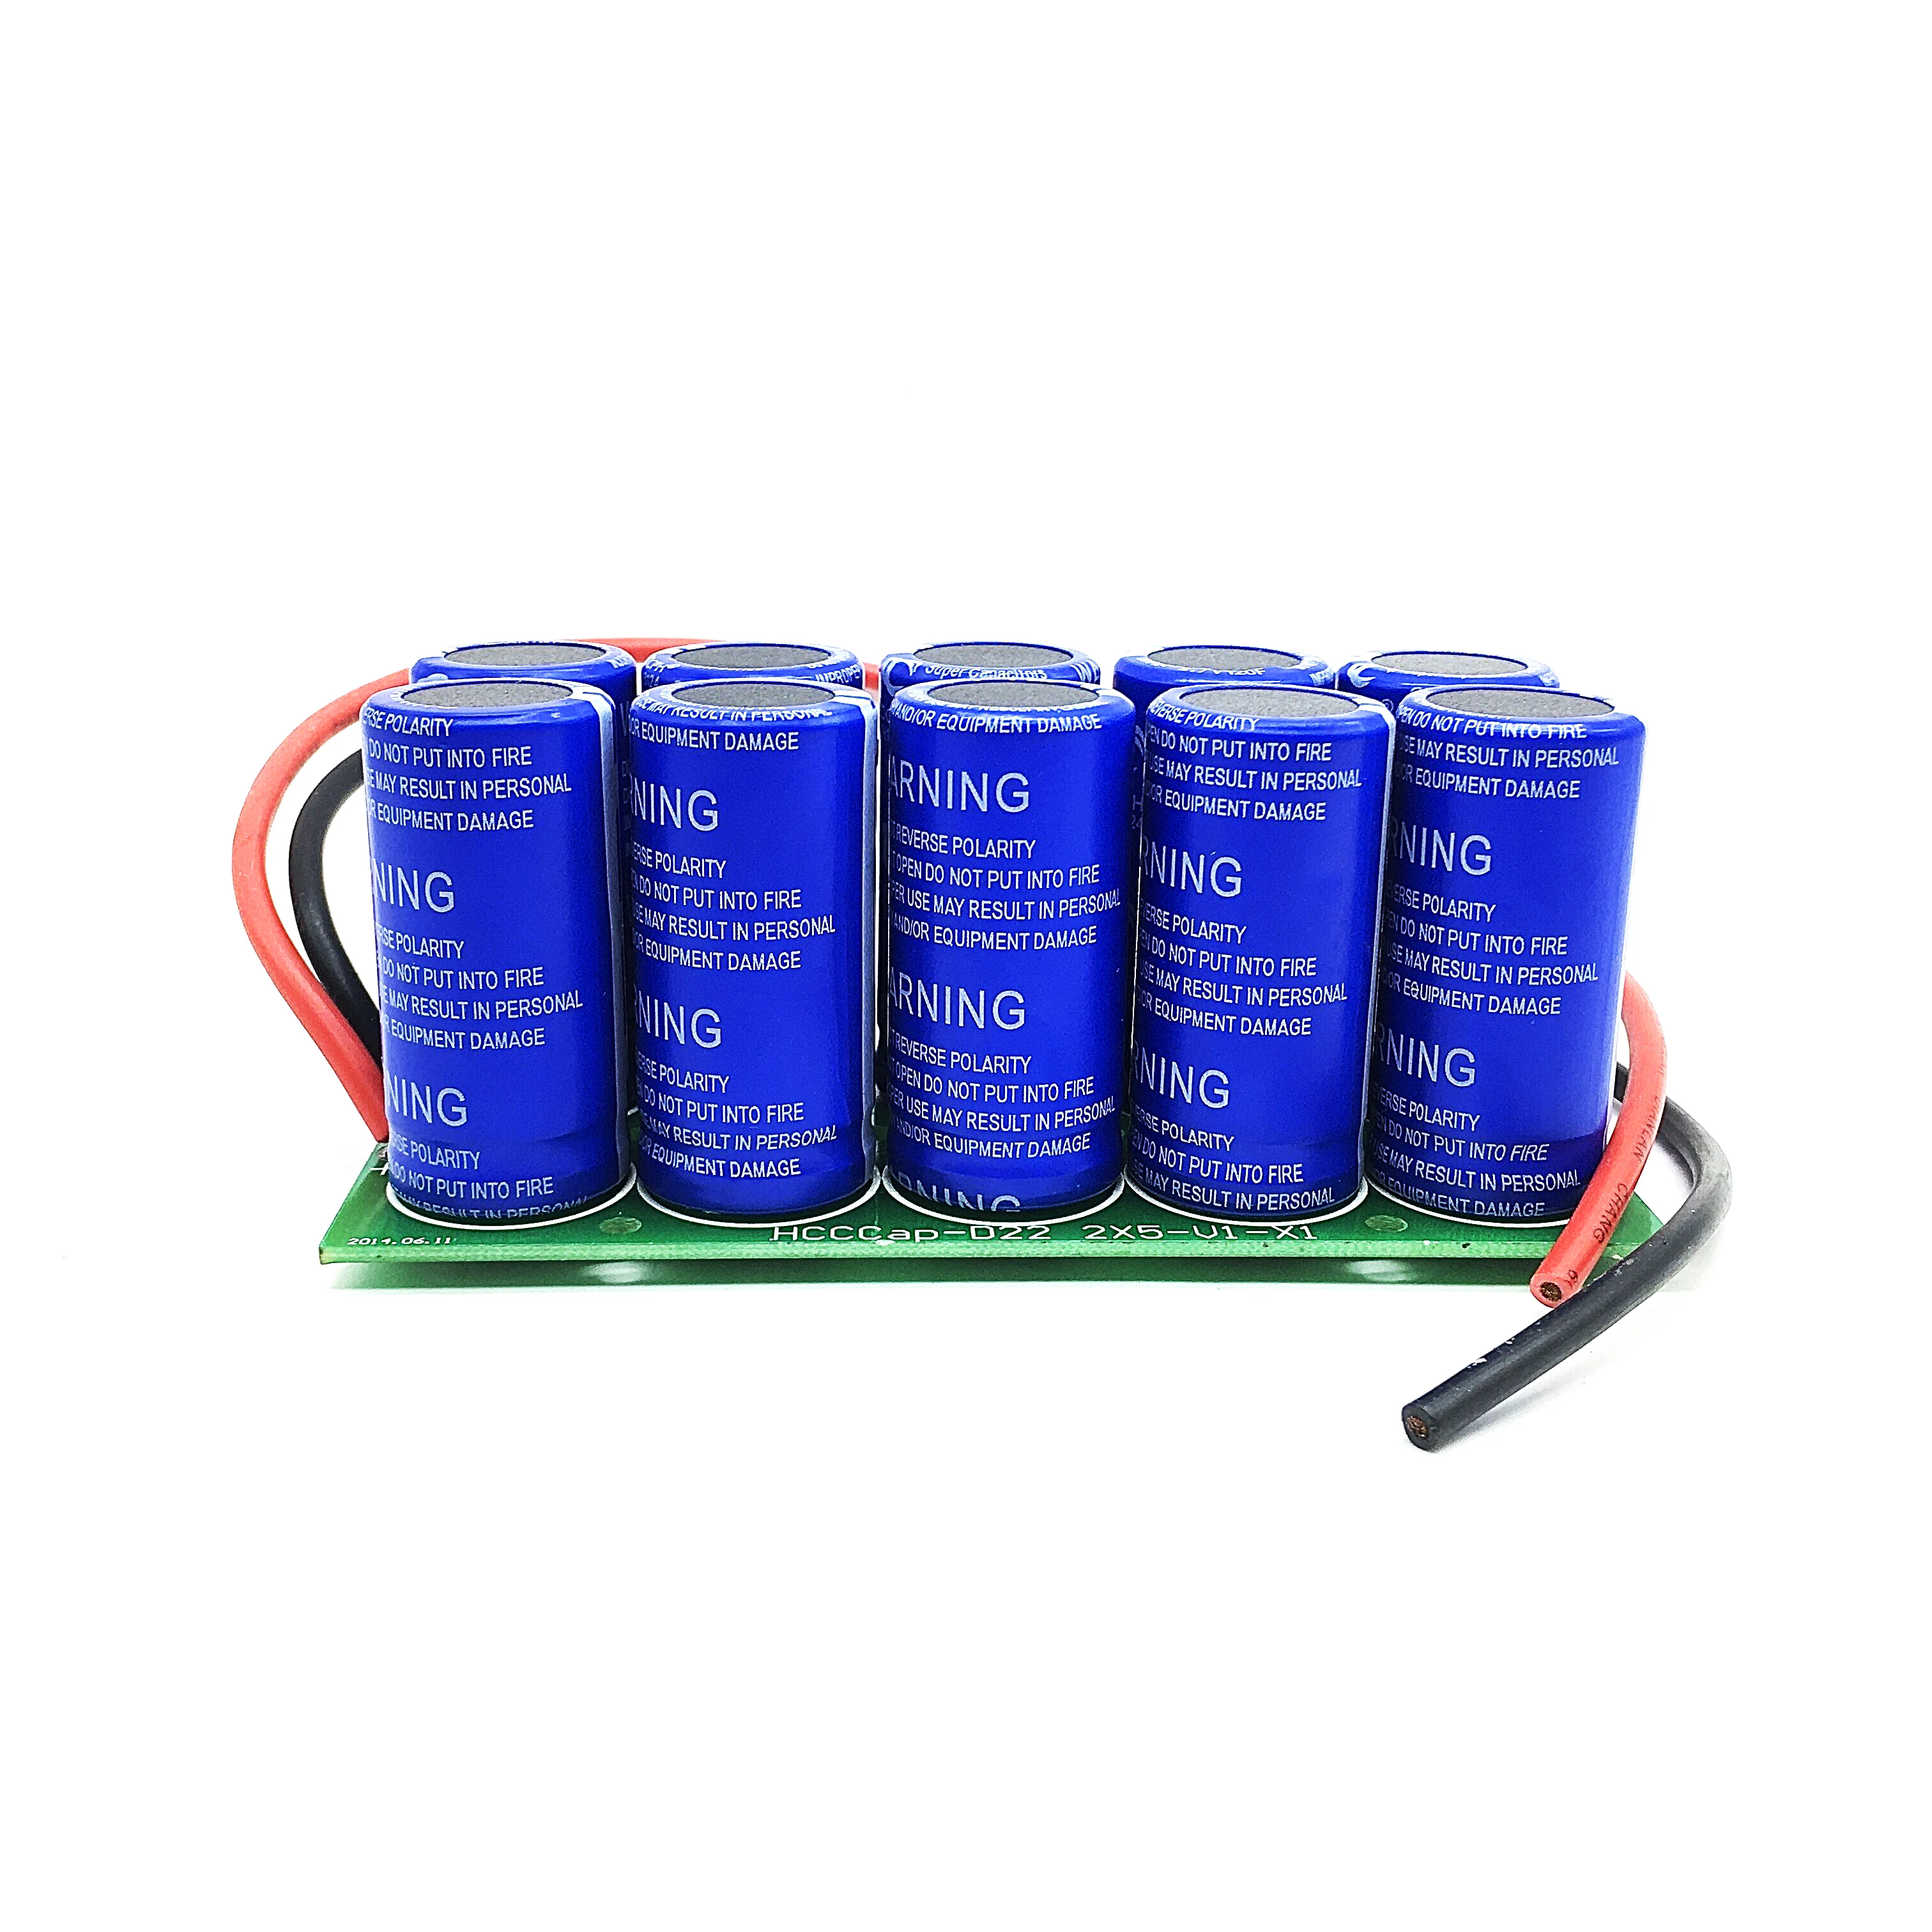 Super Capacitors Farad Capacitor Modules 27V 12F SuperCapacitors With Double Protection Board With Line UltraCapacitor mini router module smart metal case with cable distribution box 8 ports router oem modules with cable router module motherboard